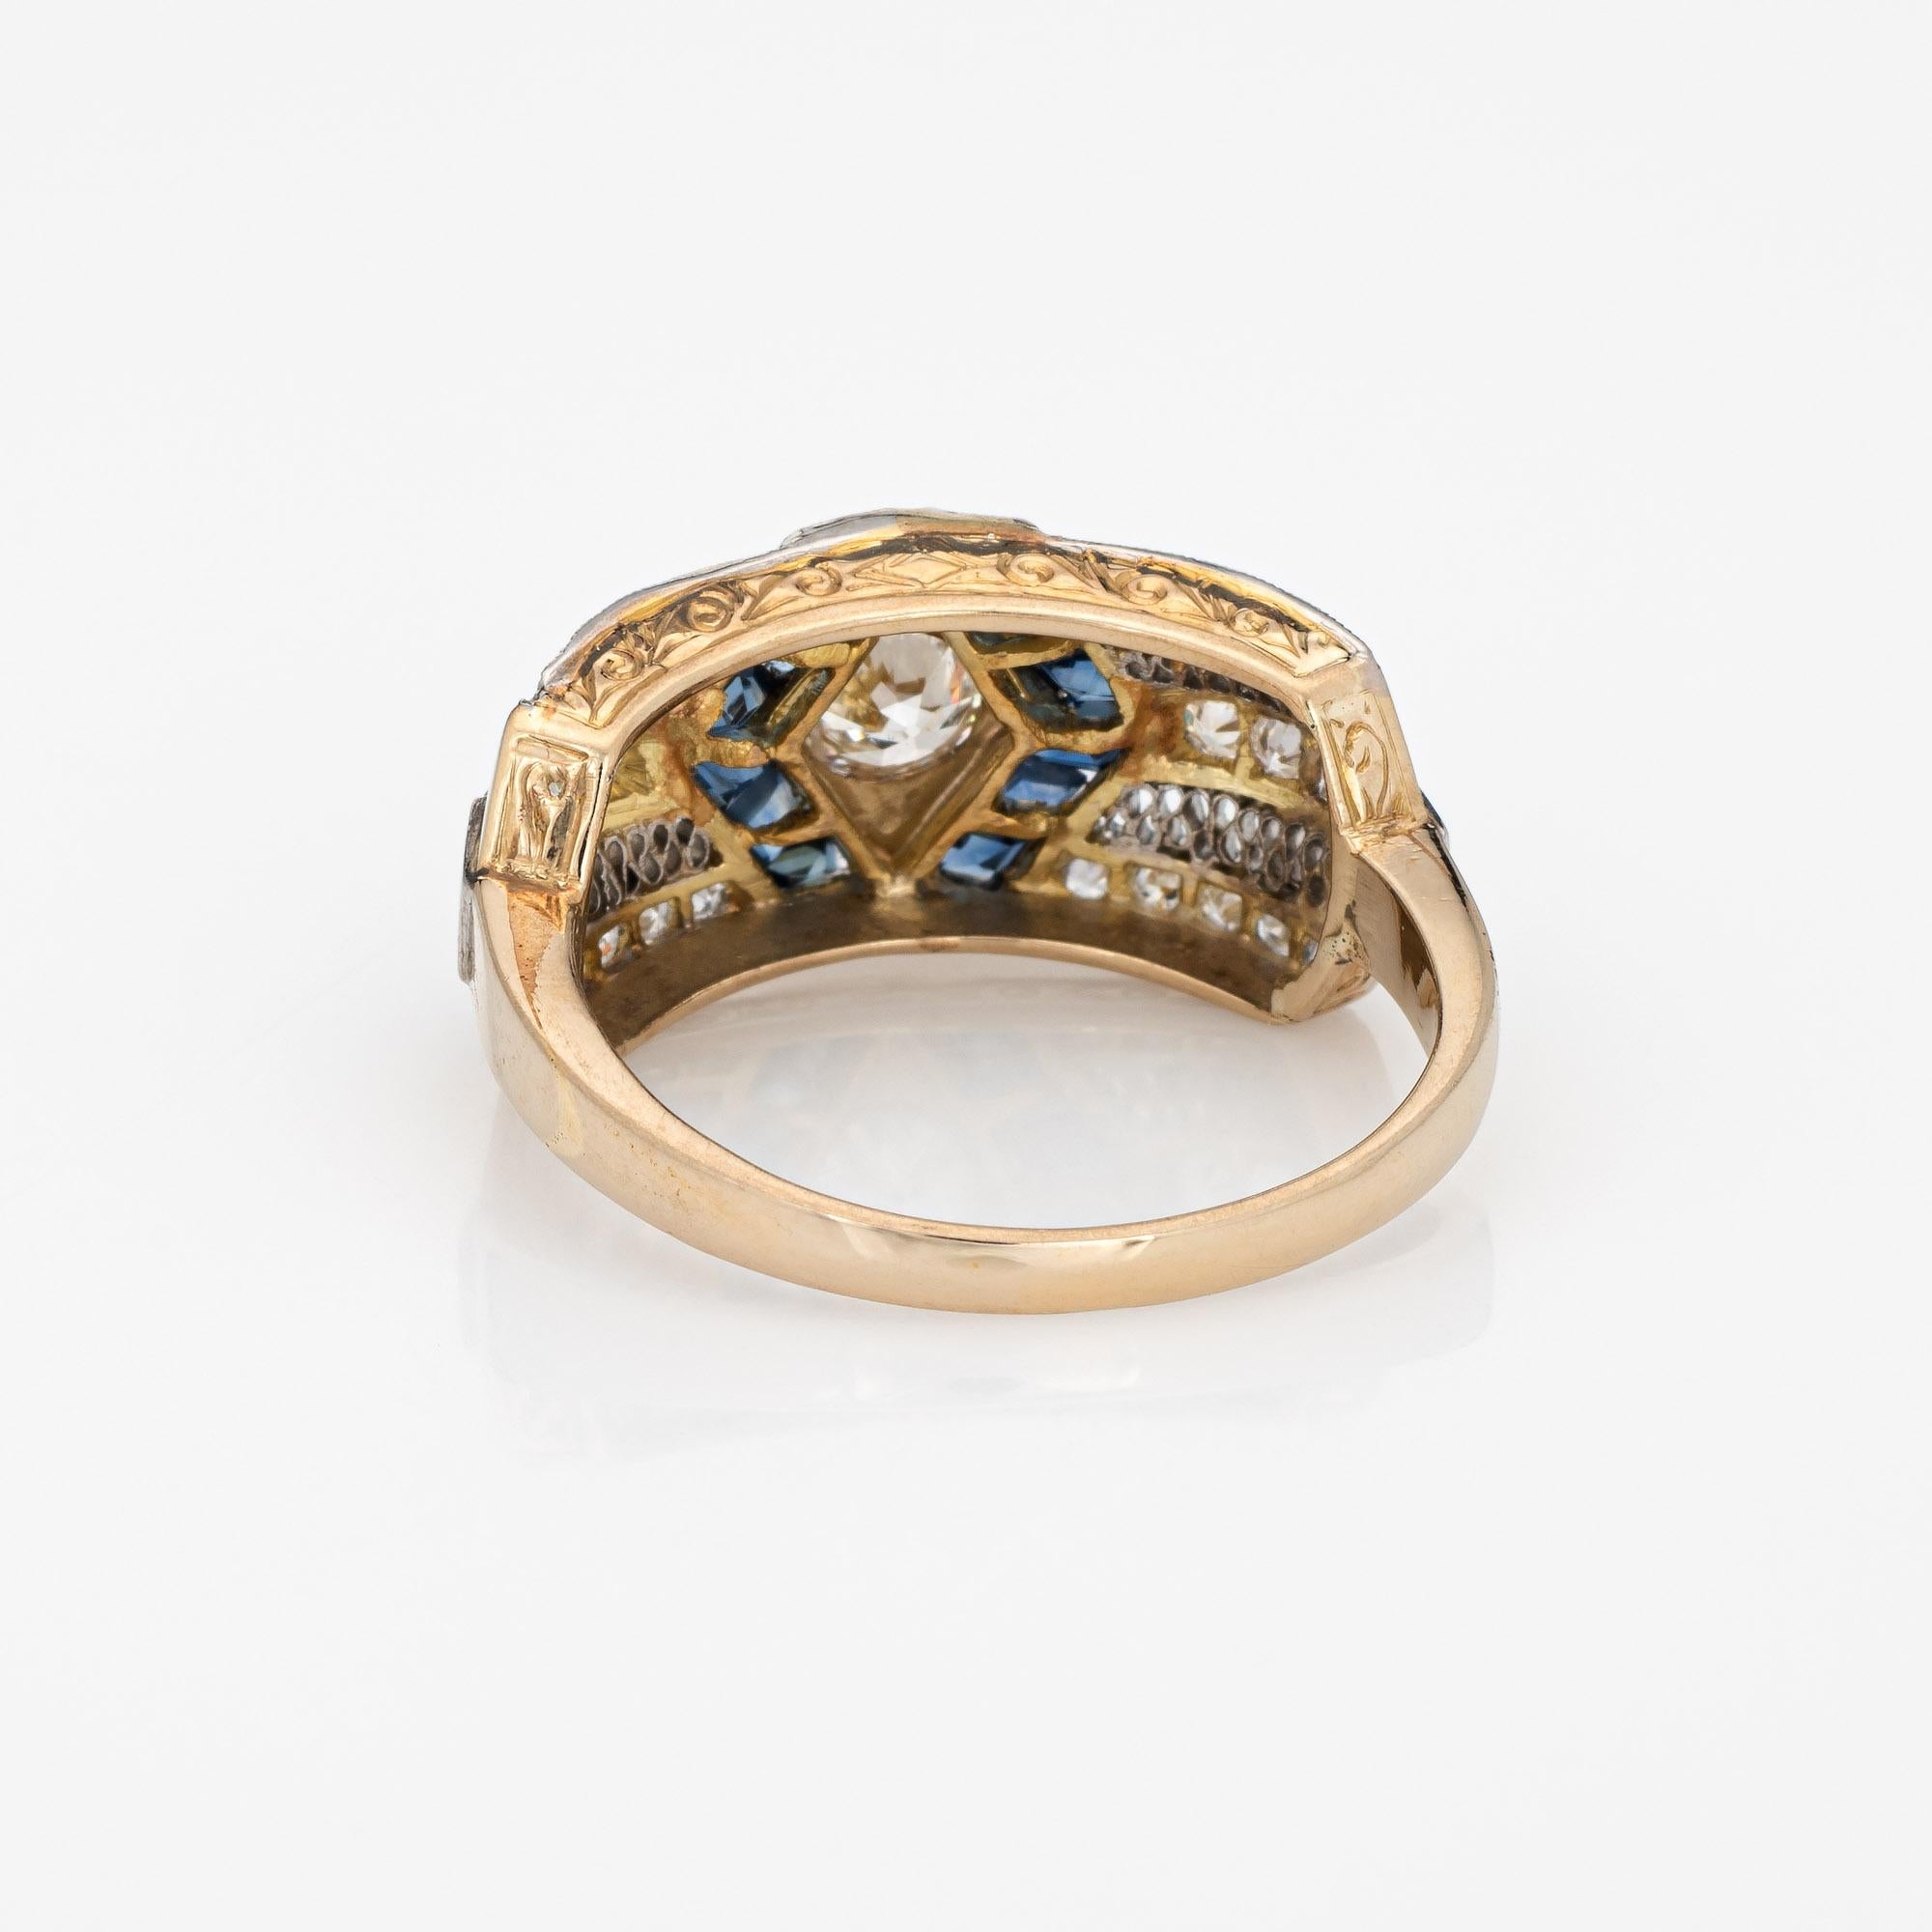 Vintage Art Deco Diamond Sapphire Ring 18k Gold Platinum Band Estate Jewelry  In Good Condition For Sale In Torrance, CA